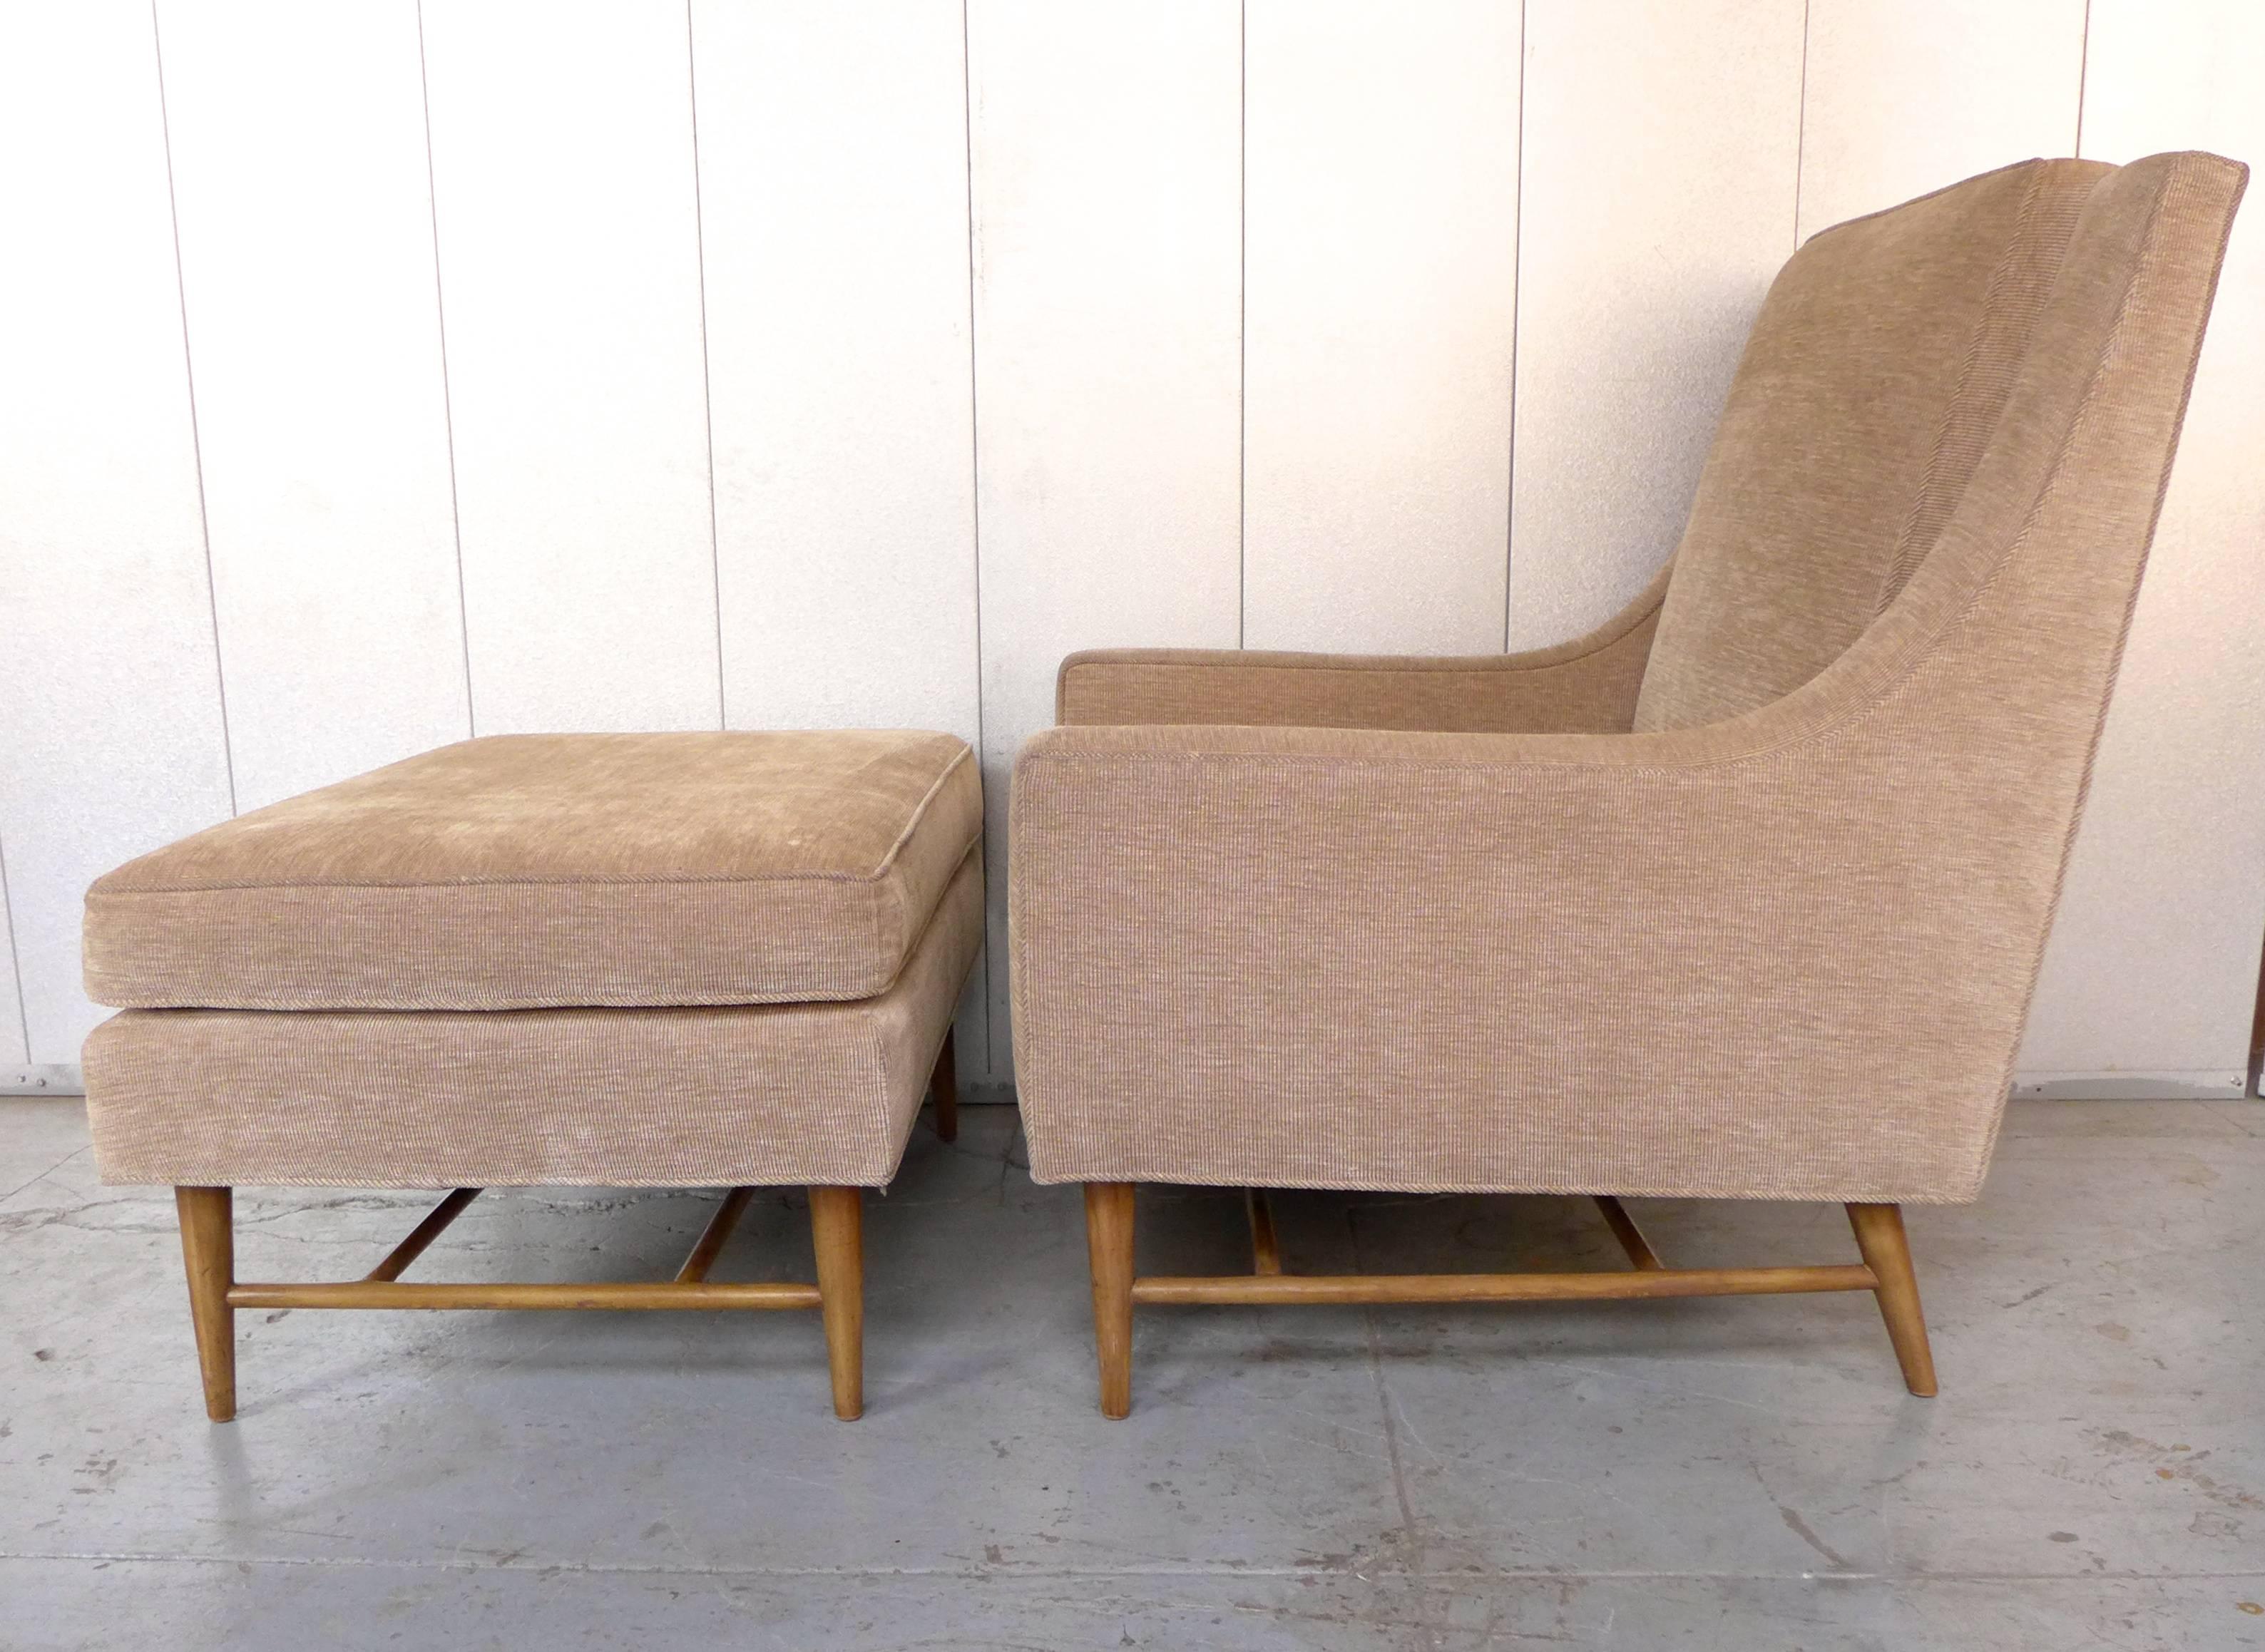 High-back lounge chair (model #468) with bleached mahogany legs and cross-stretchers; along with the corresponding ottoman (model #468A). Designed and produced by Harvey Probber, c. 1950's. Reupholstered in the past eight years.
A substantial and